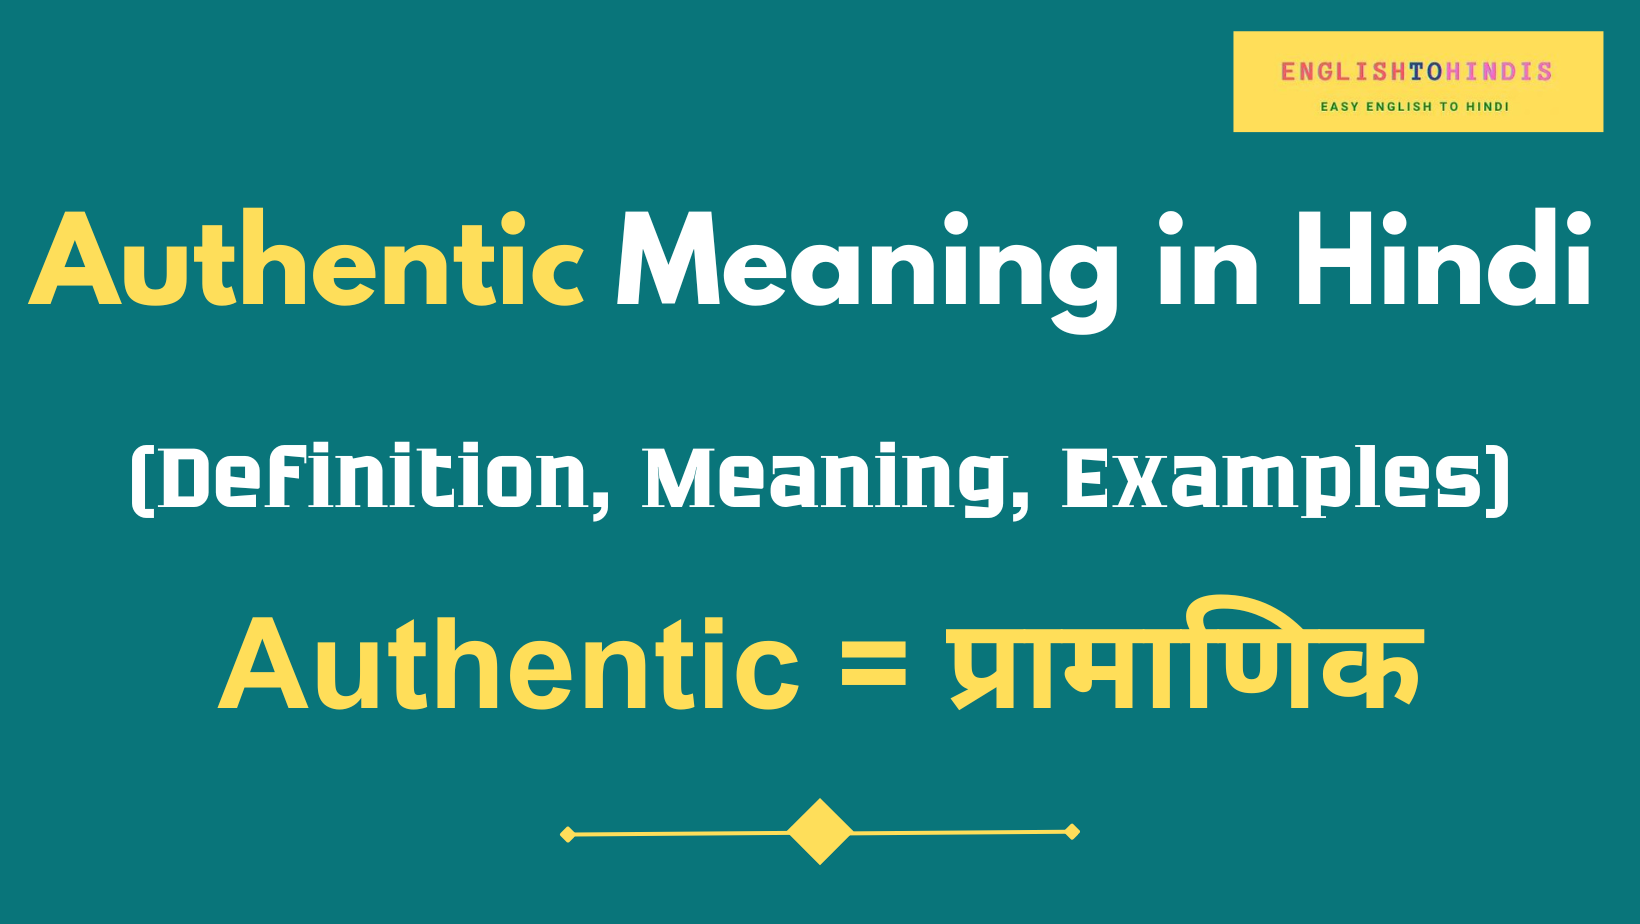 Authentic Meaning in Hindi